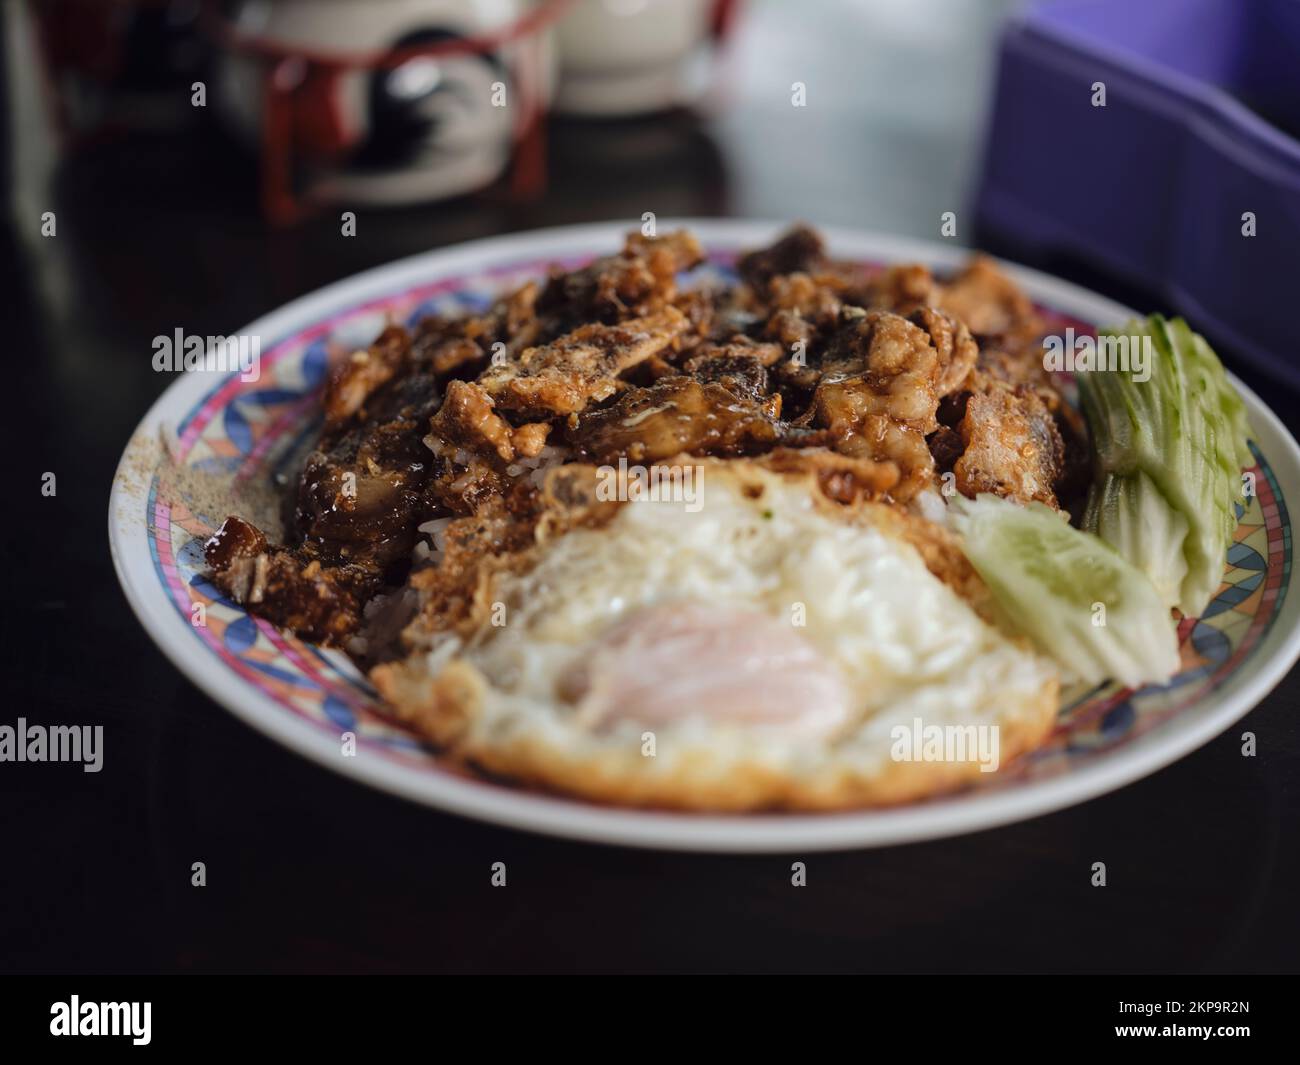 Fried Pork with Garlic, Pepper and fried egg on rice. Stock Photo